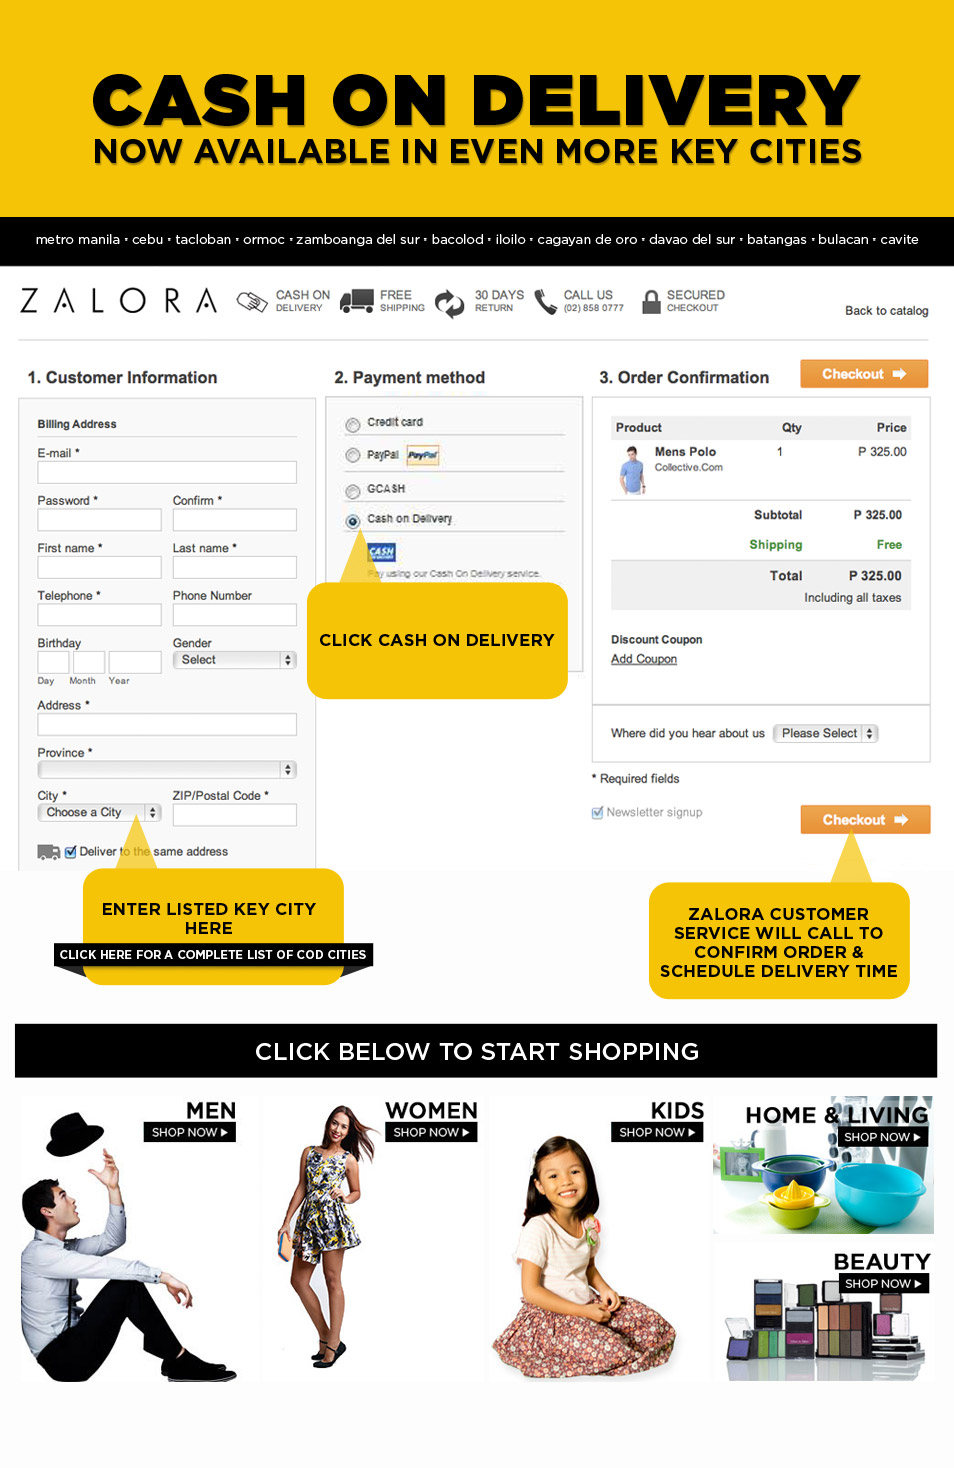 CASH ON DELIVERY at ZALORA Philippines - Now available in key cities!